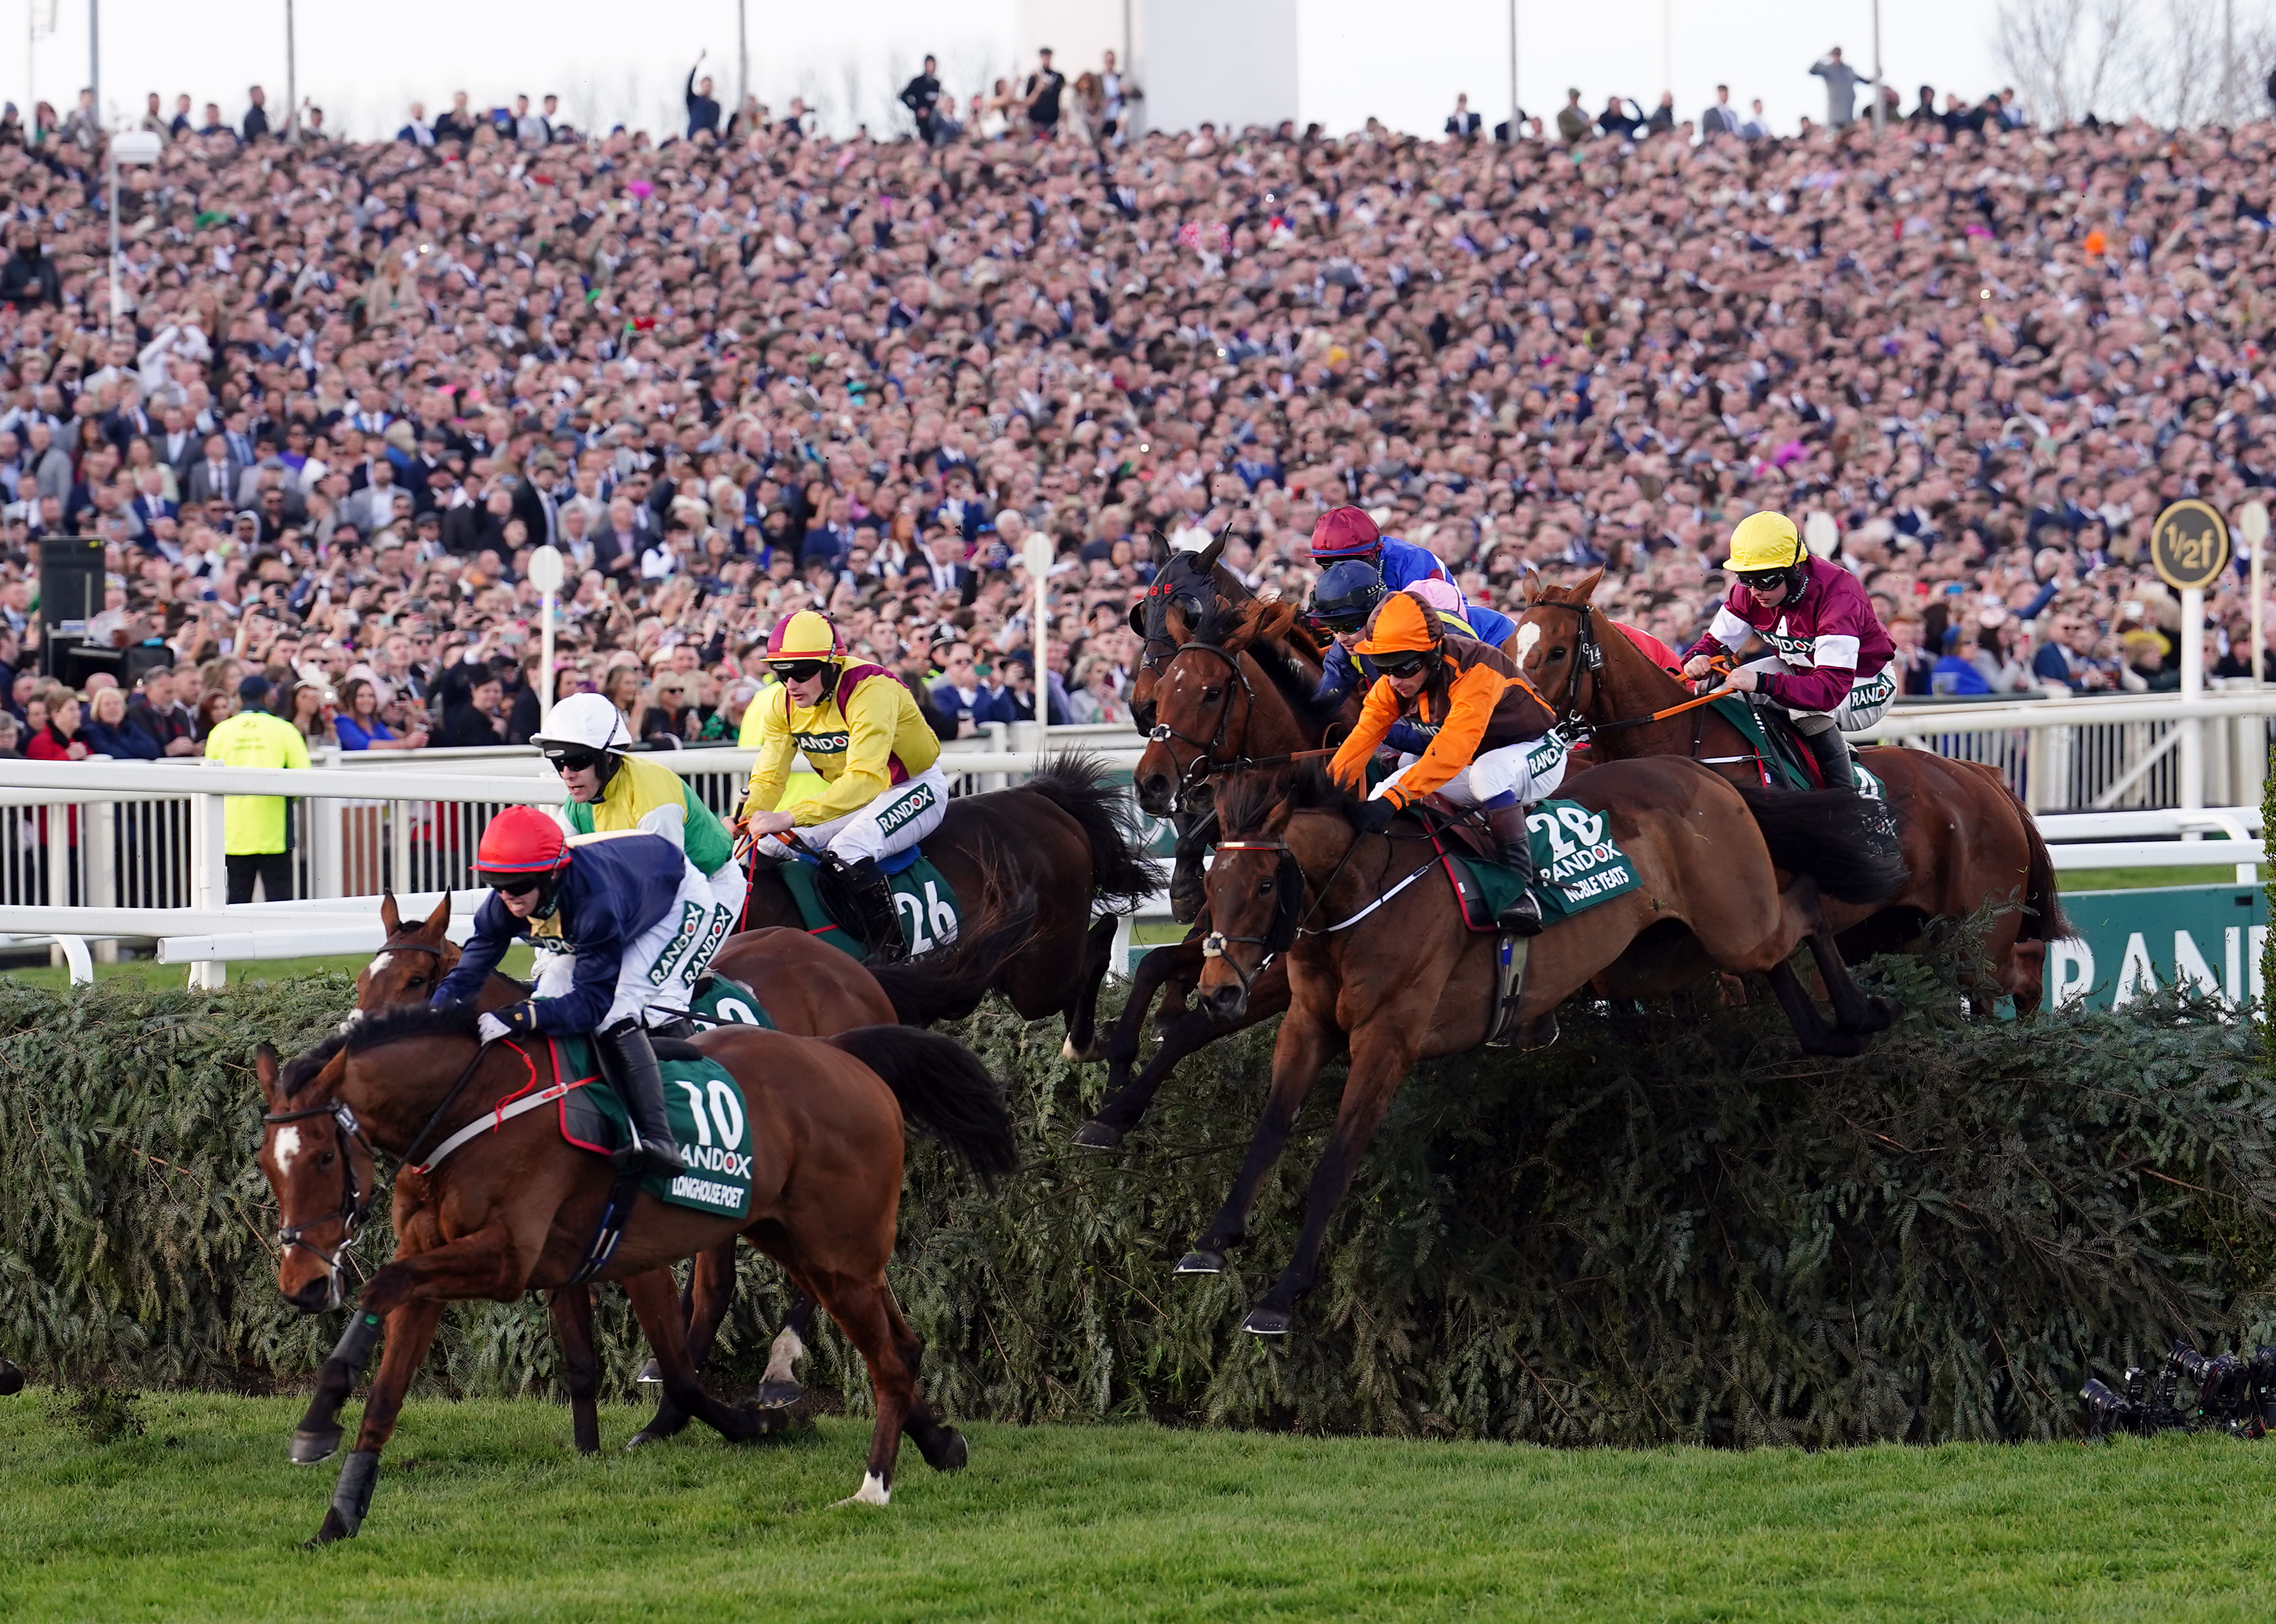 Runners in the 2022 Grand National